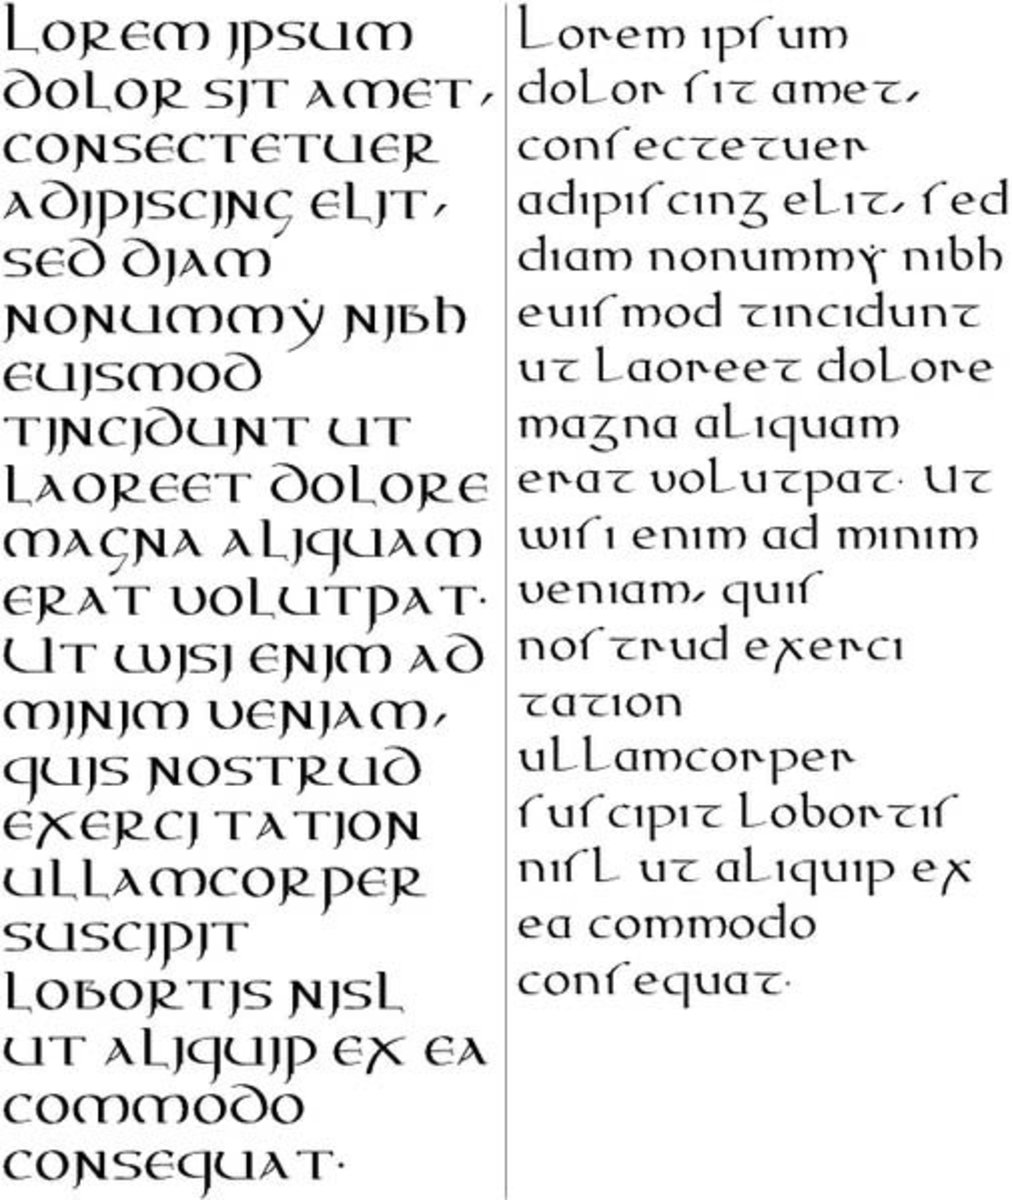 Uncial is a majuscule script (written in all capital letters) used commonly from the 4th to 8th centuries AD by Latin and Greek scribes.